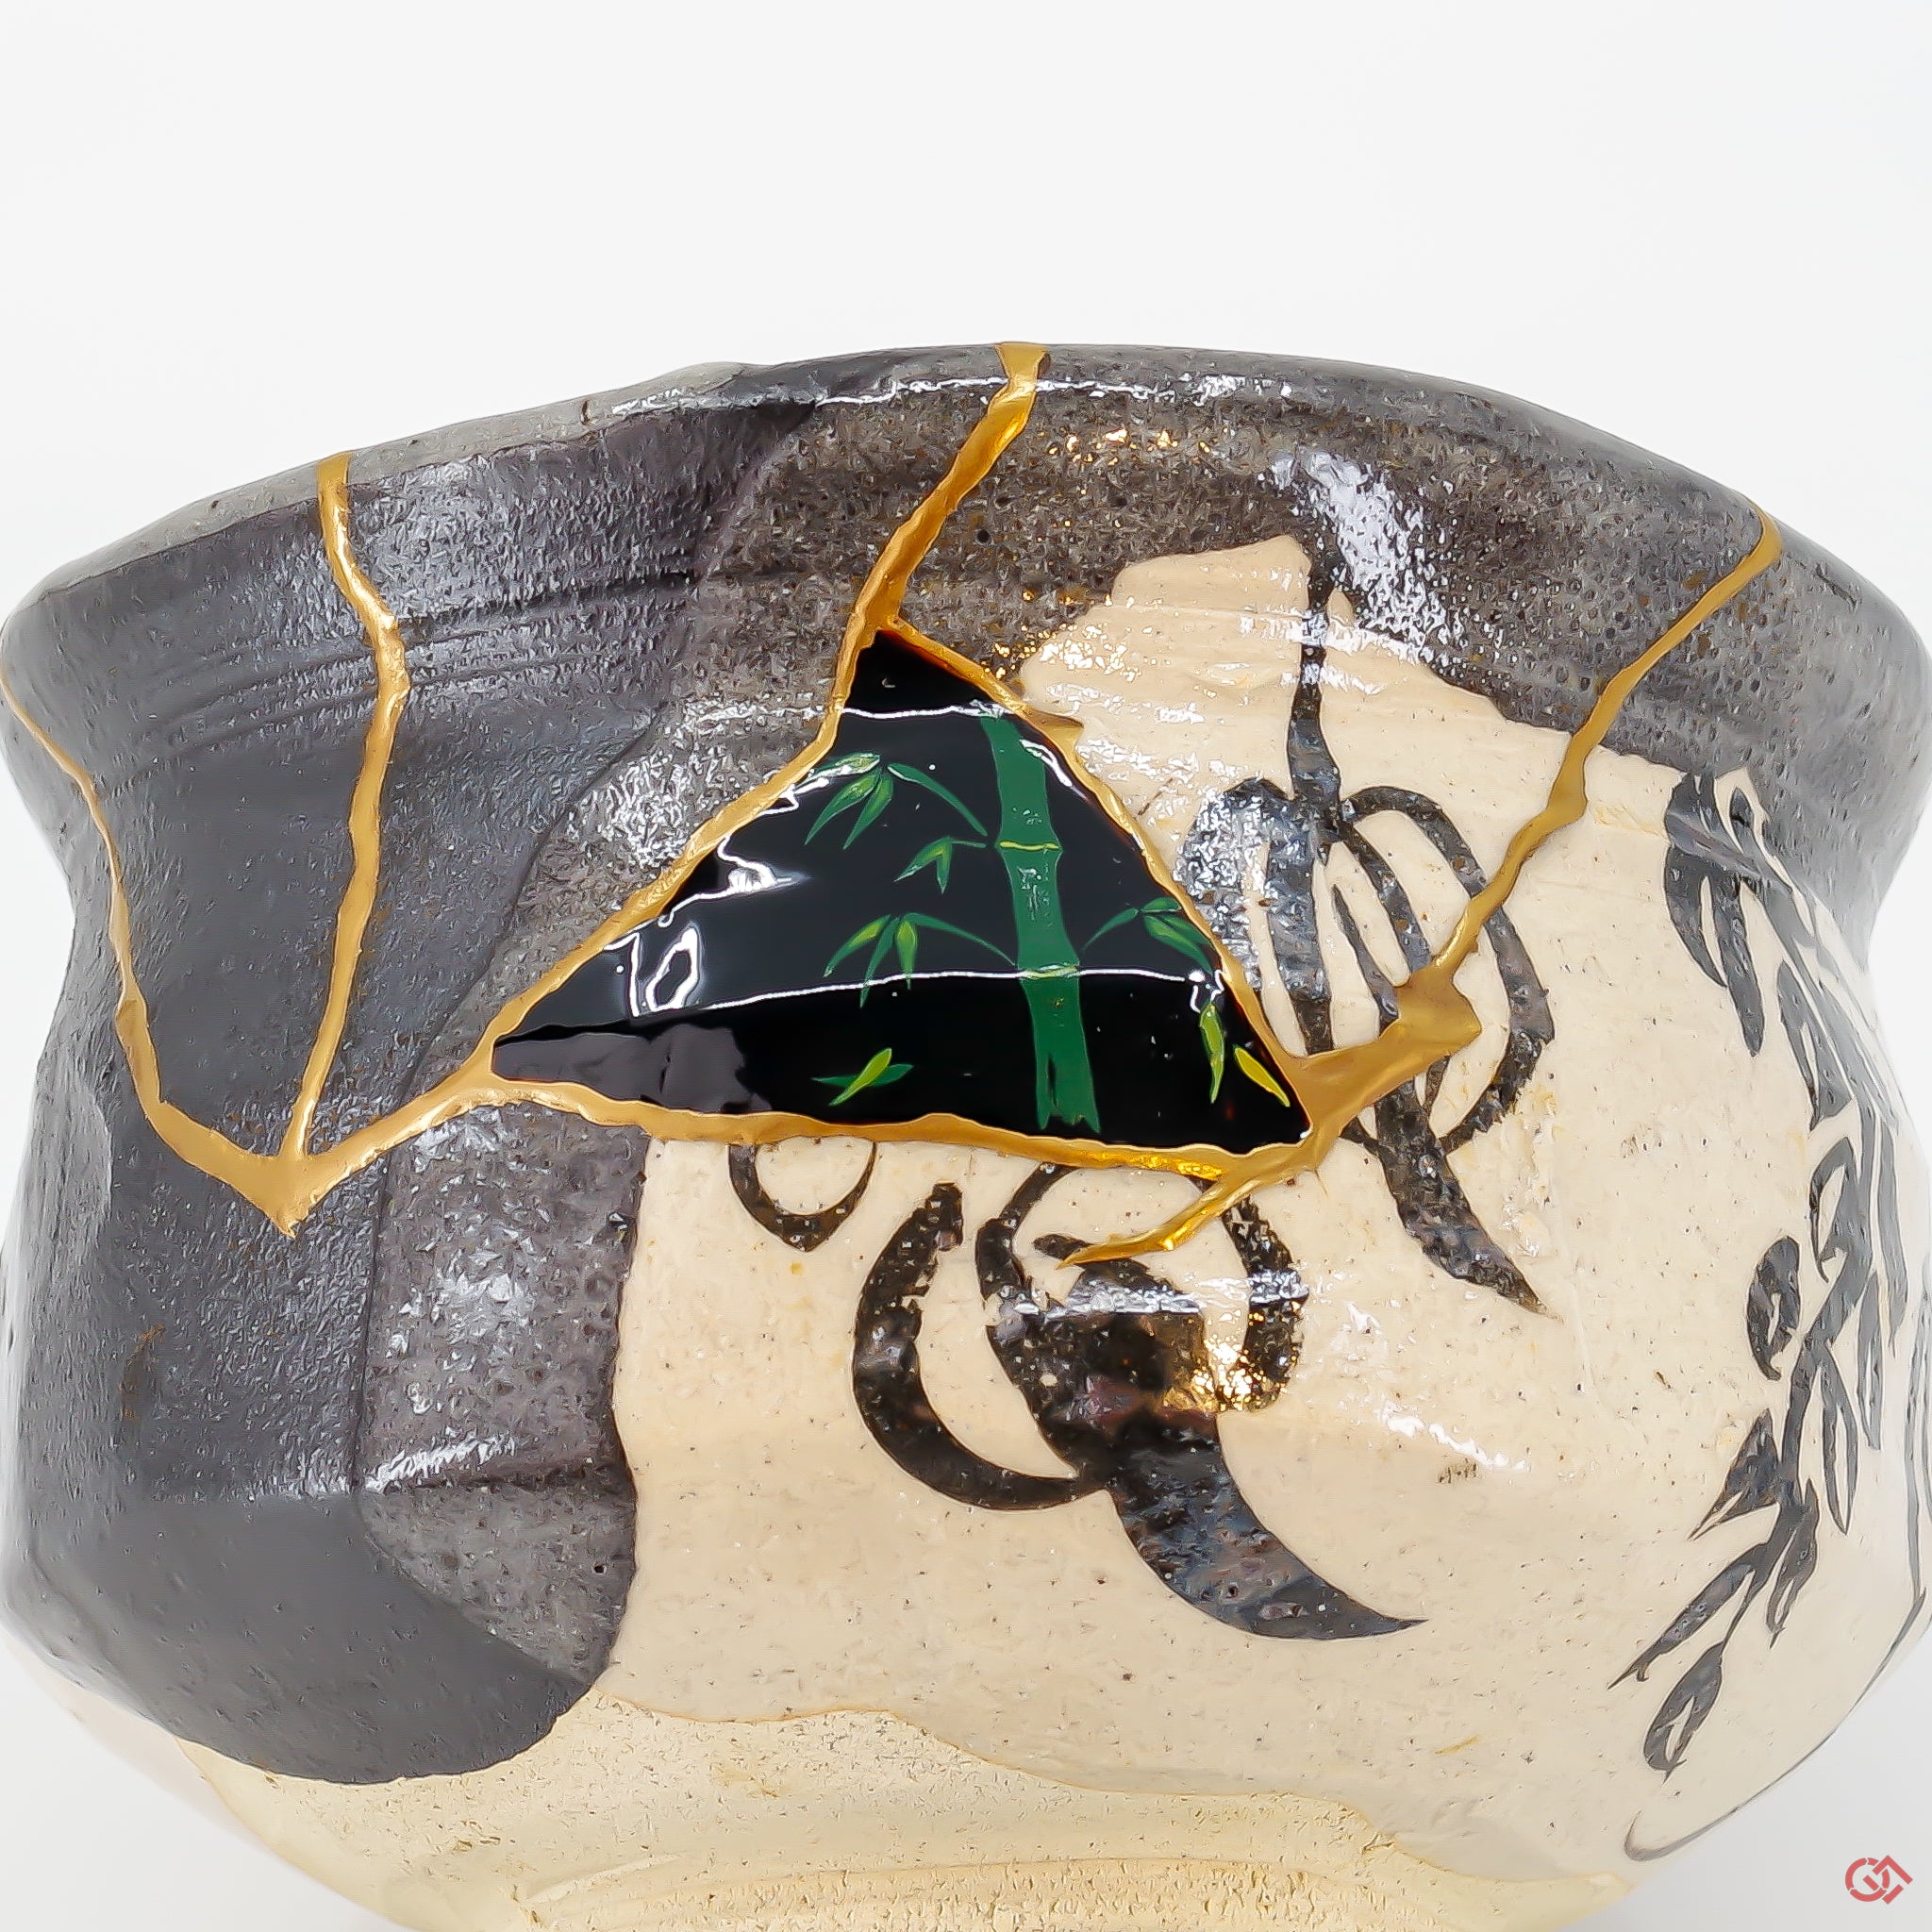 A close-up photo of an authentic Kintsugi pottery piece, showing the detail of its repairs and artisty. craftsmanship.